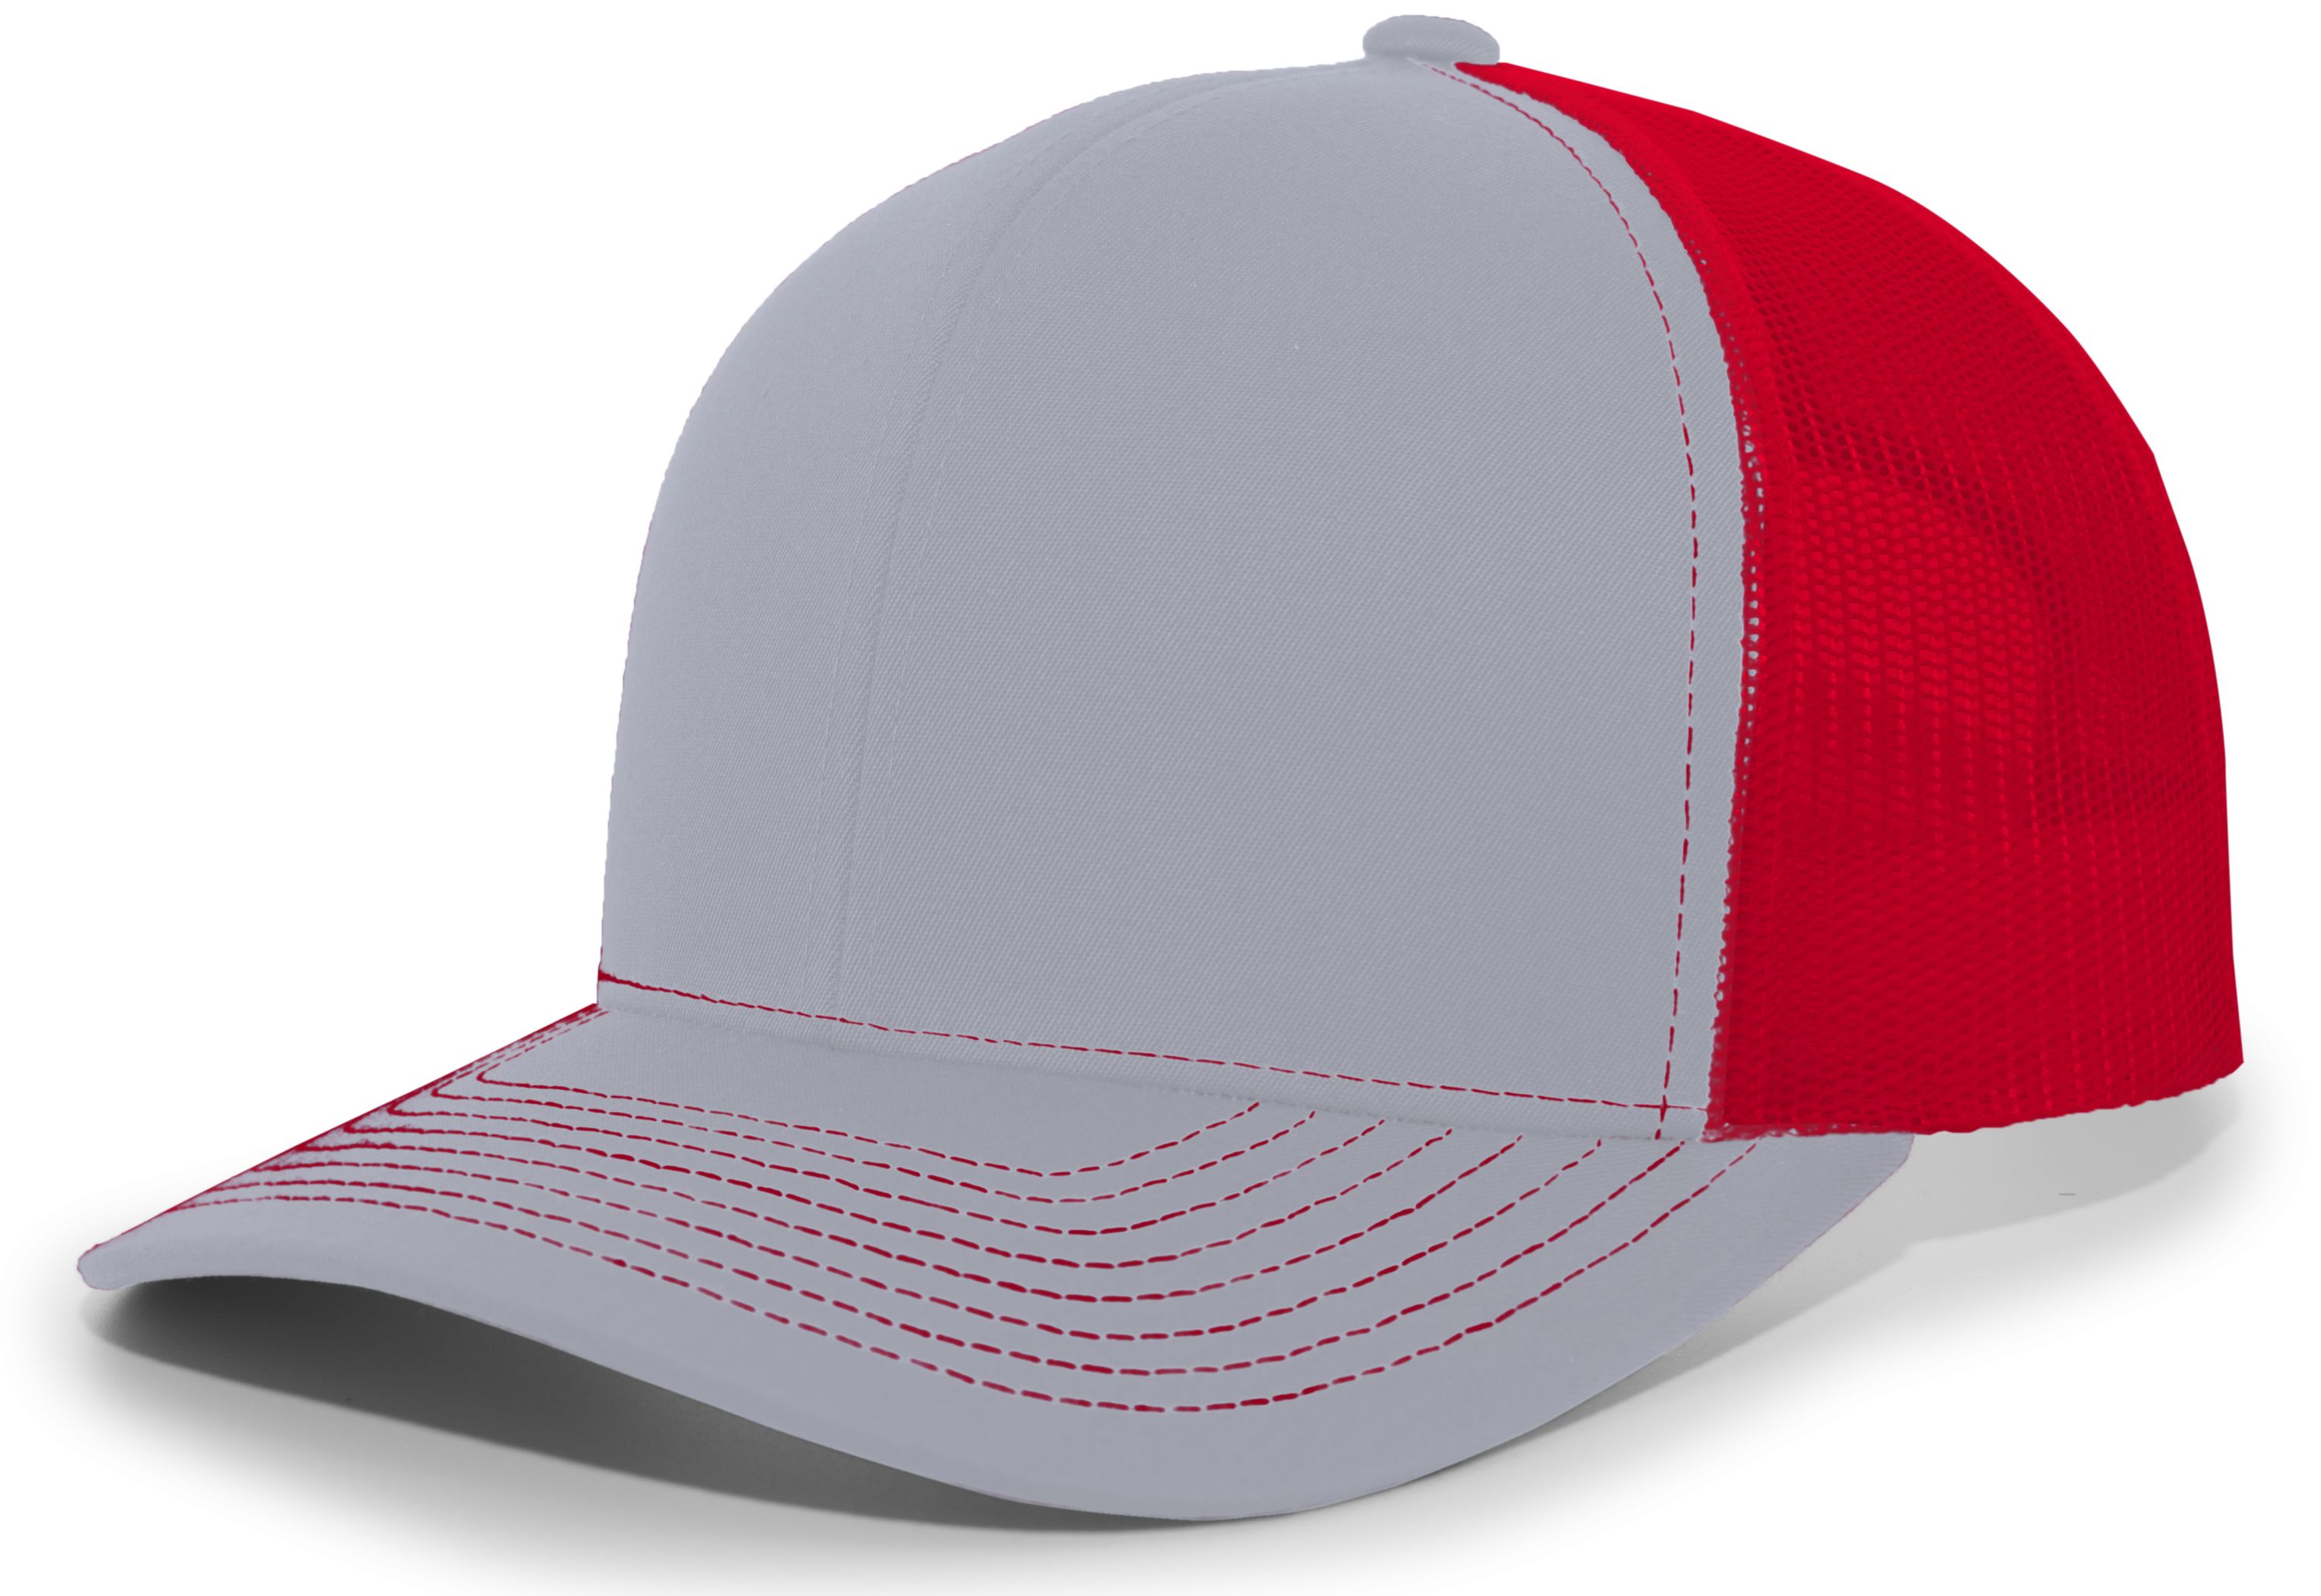 click to view Heather Grey/Red/Heather Grey